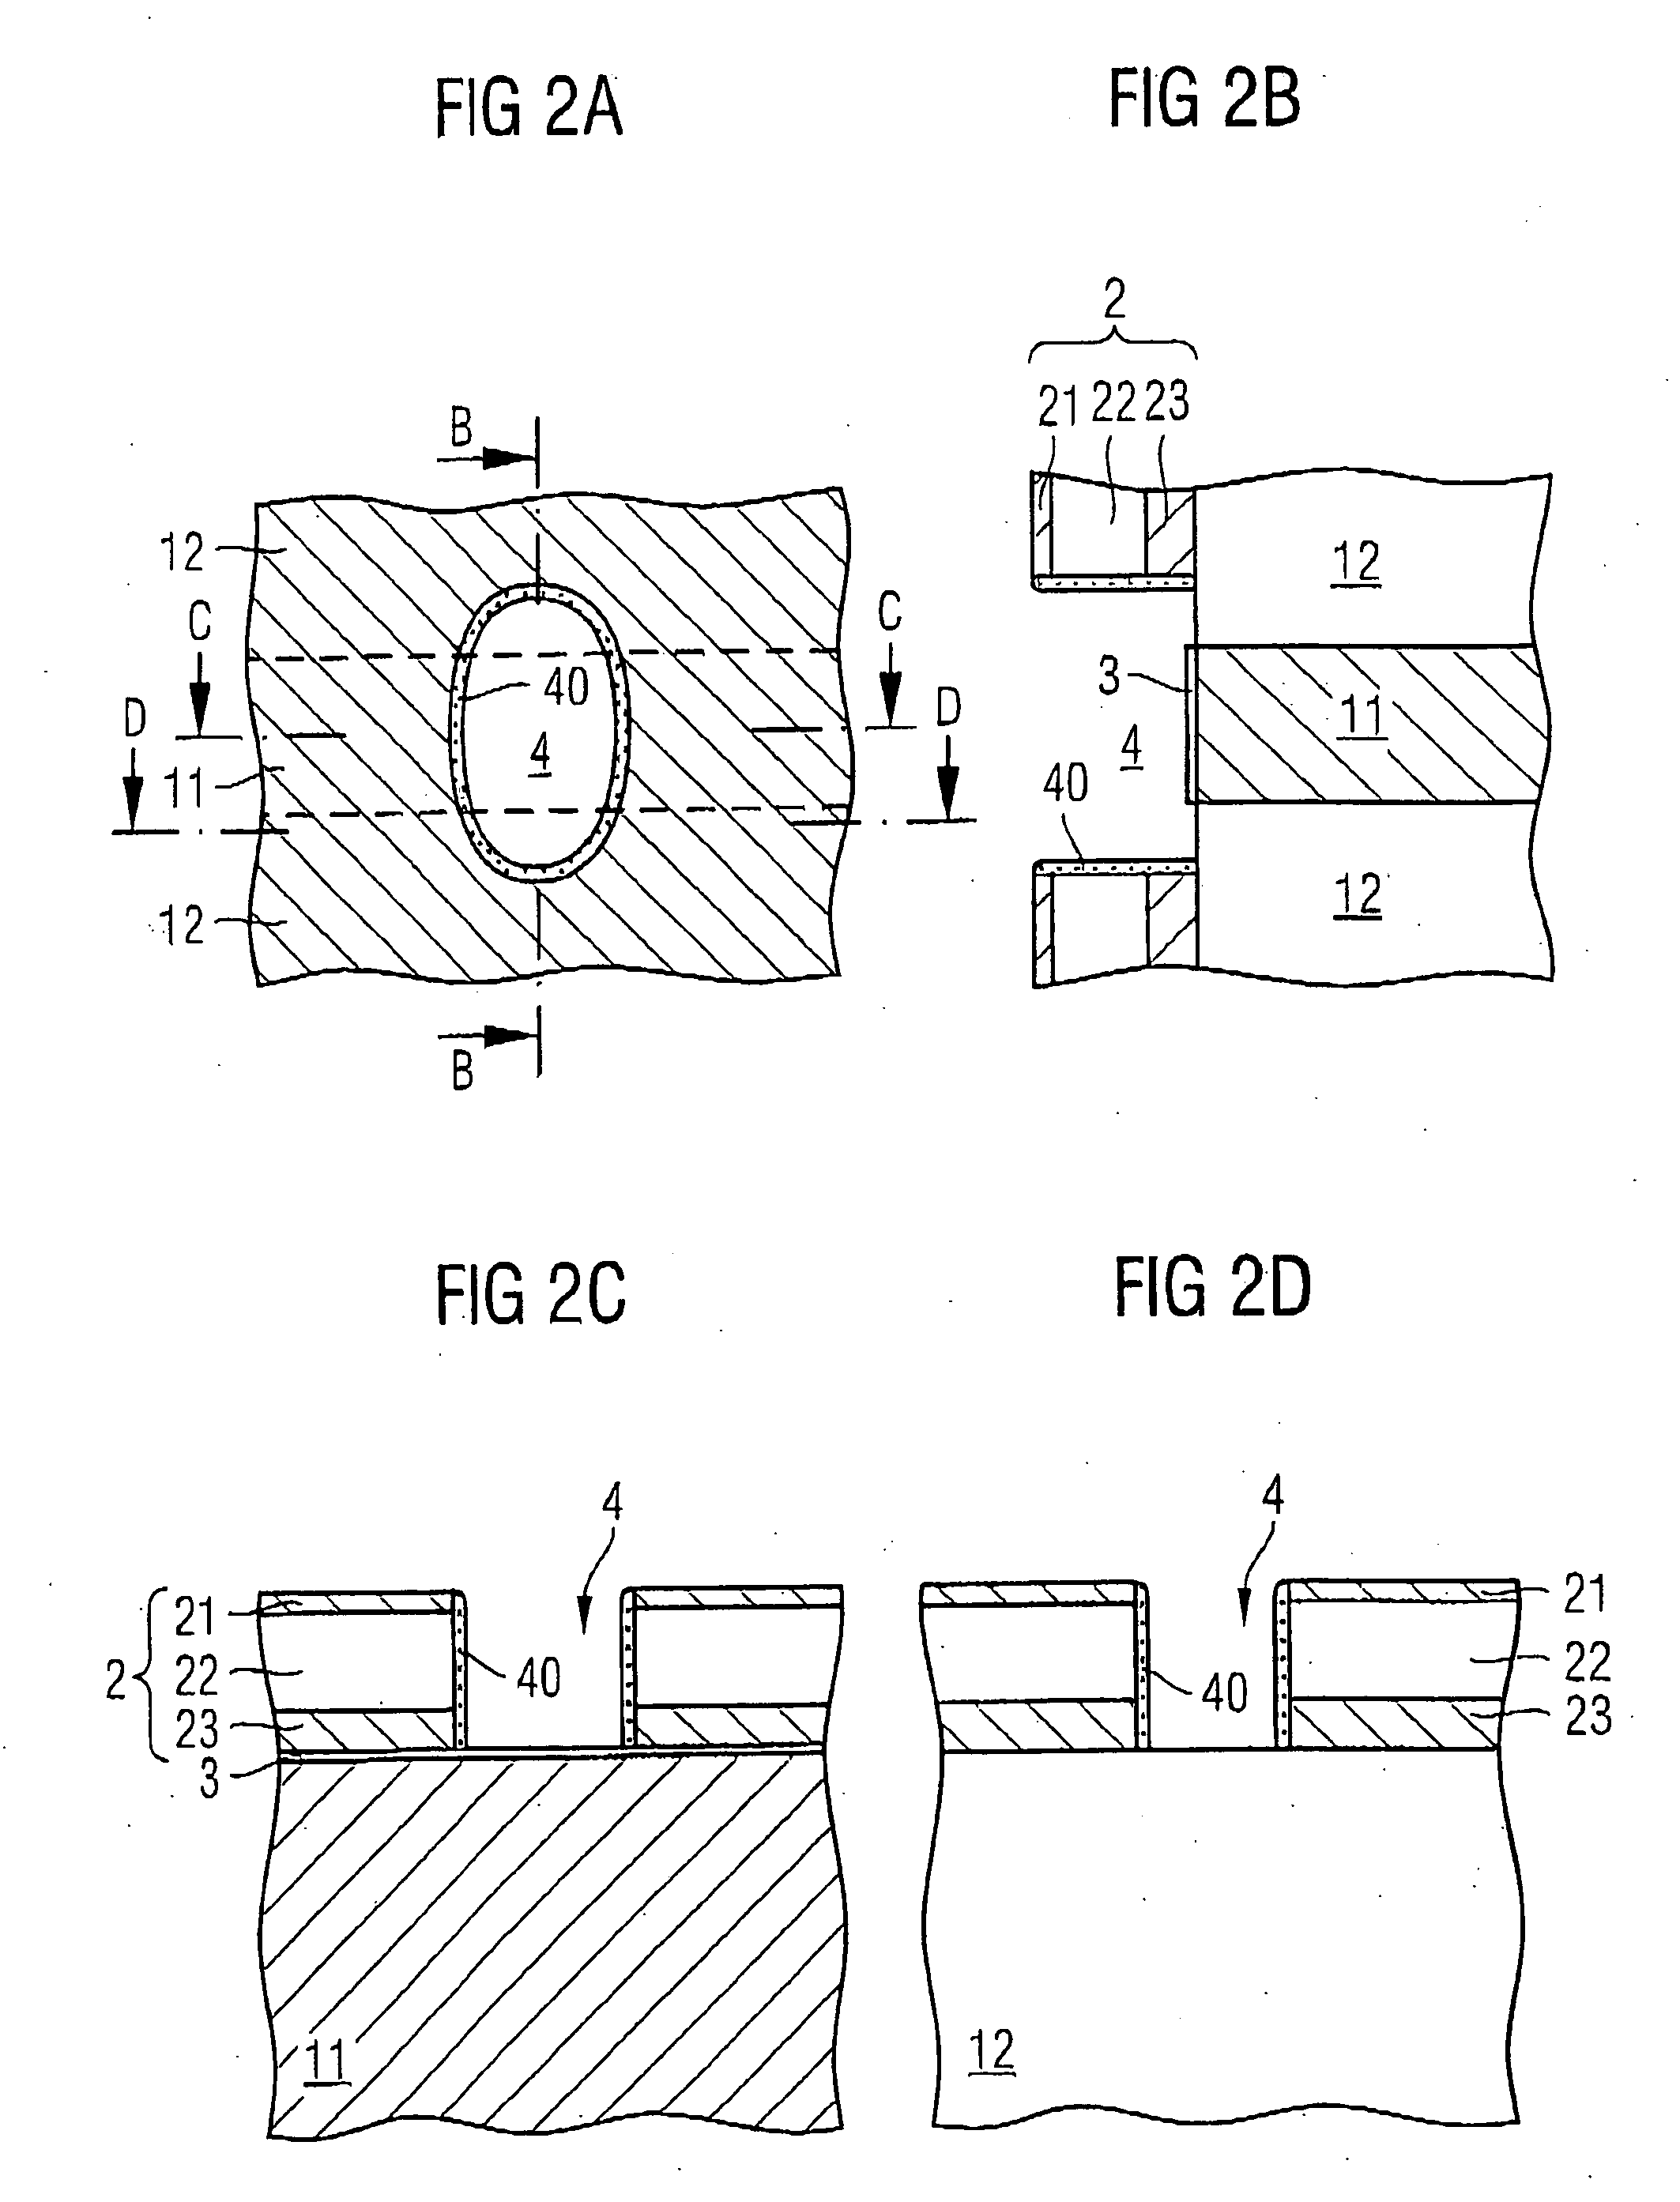 Method of manufacturing a field effect transistor device with recessed channel and corner gate device